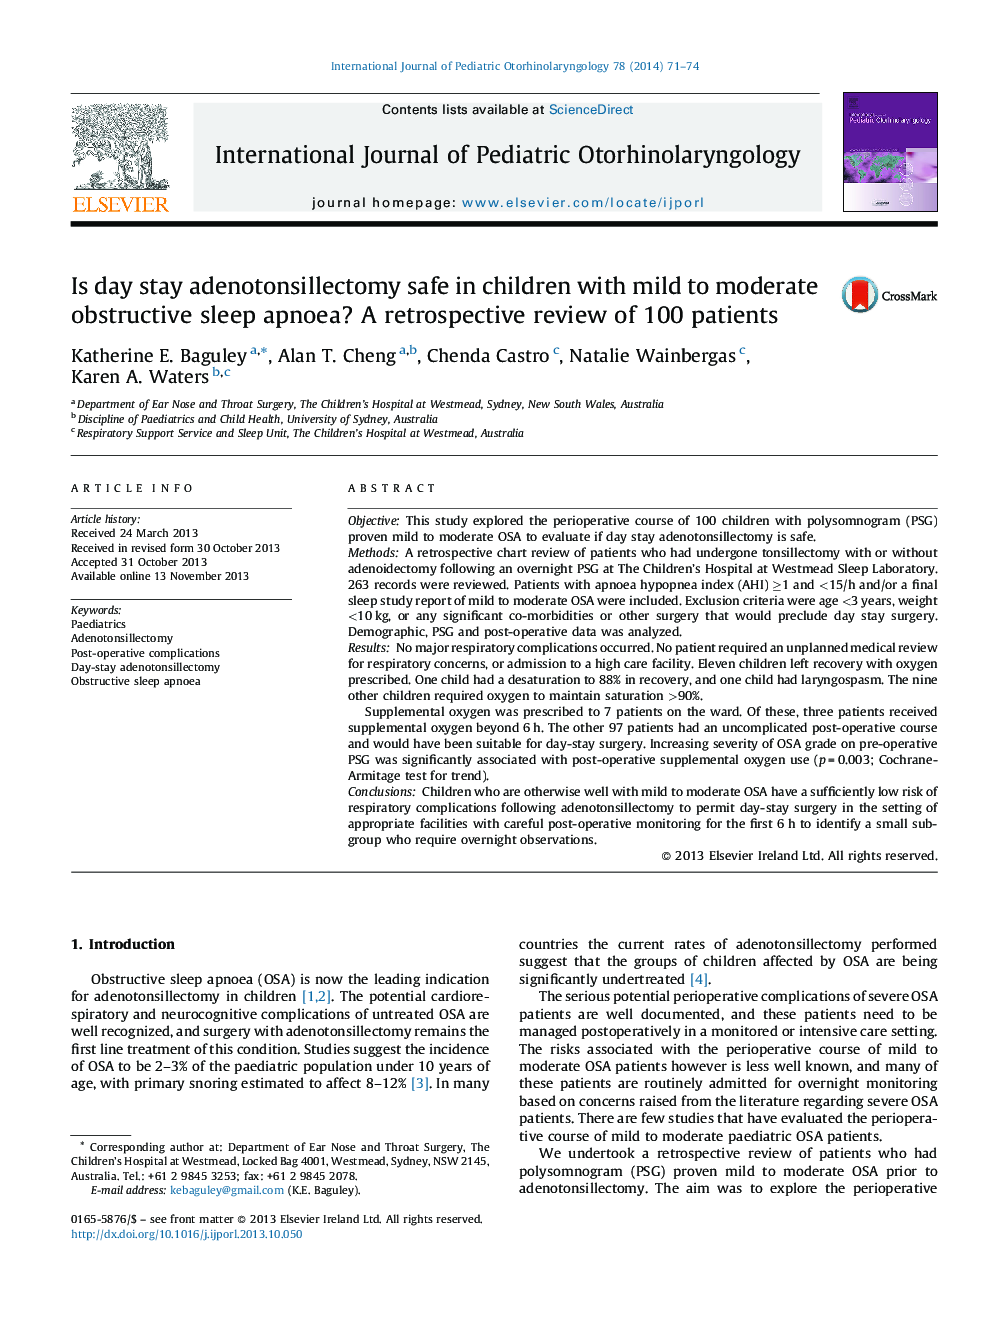 Is day stay adenotonsillectomy safe in children with mild to moderate obstructive sleep apnoea? A retrospective review of 100 patients